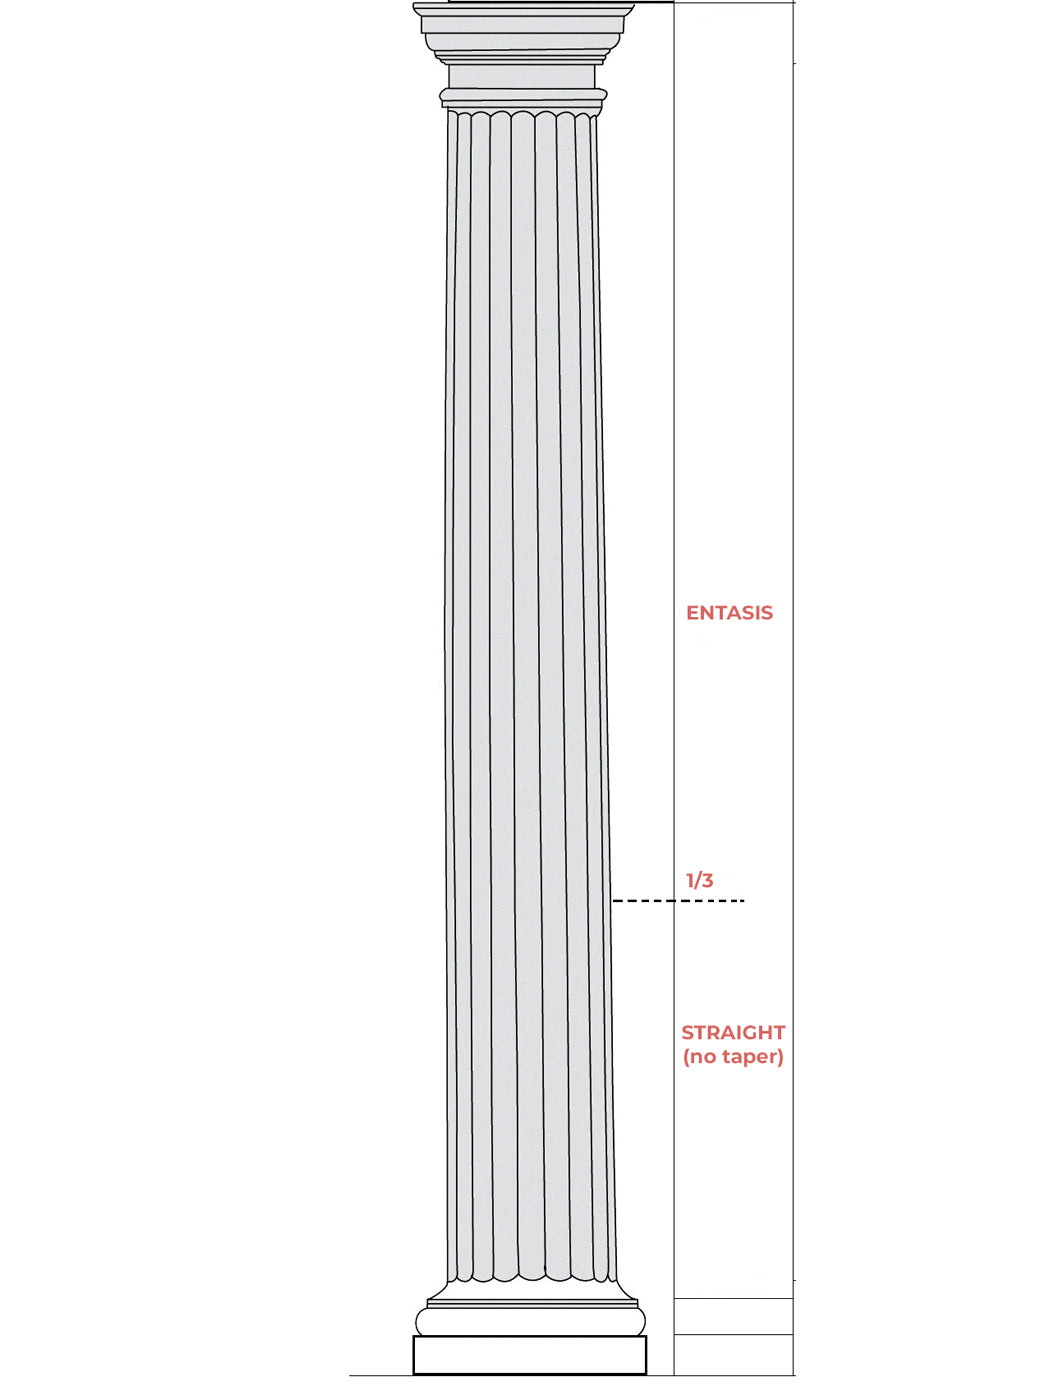 Taper Column Drawing - Illustrated Glossary - ColumnsDirect.com